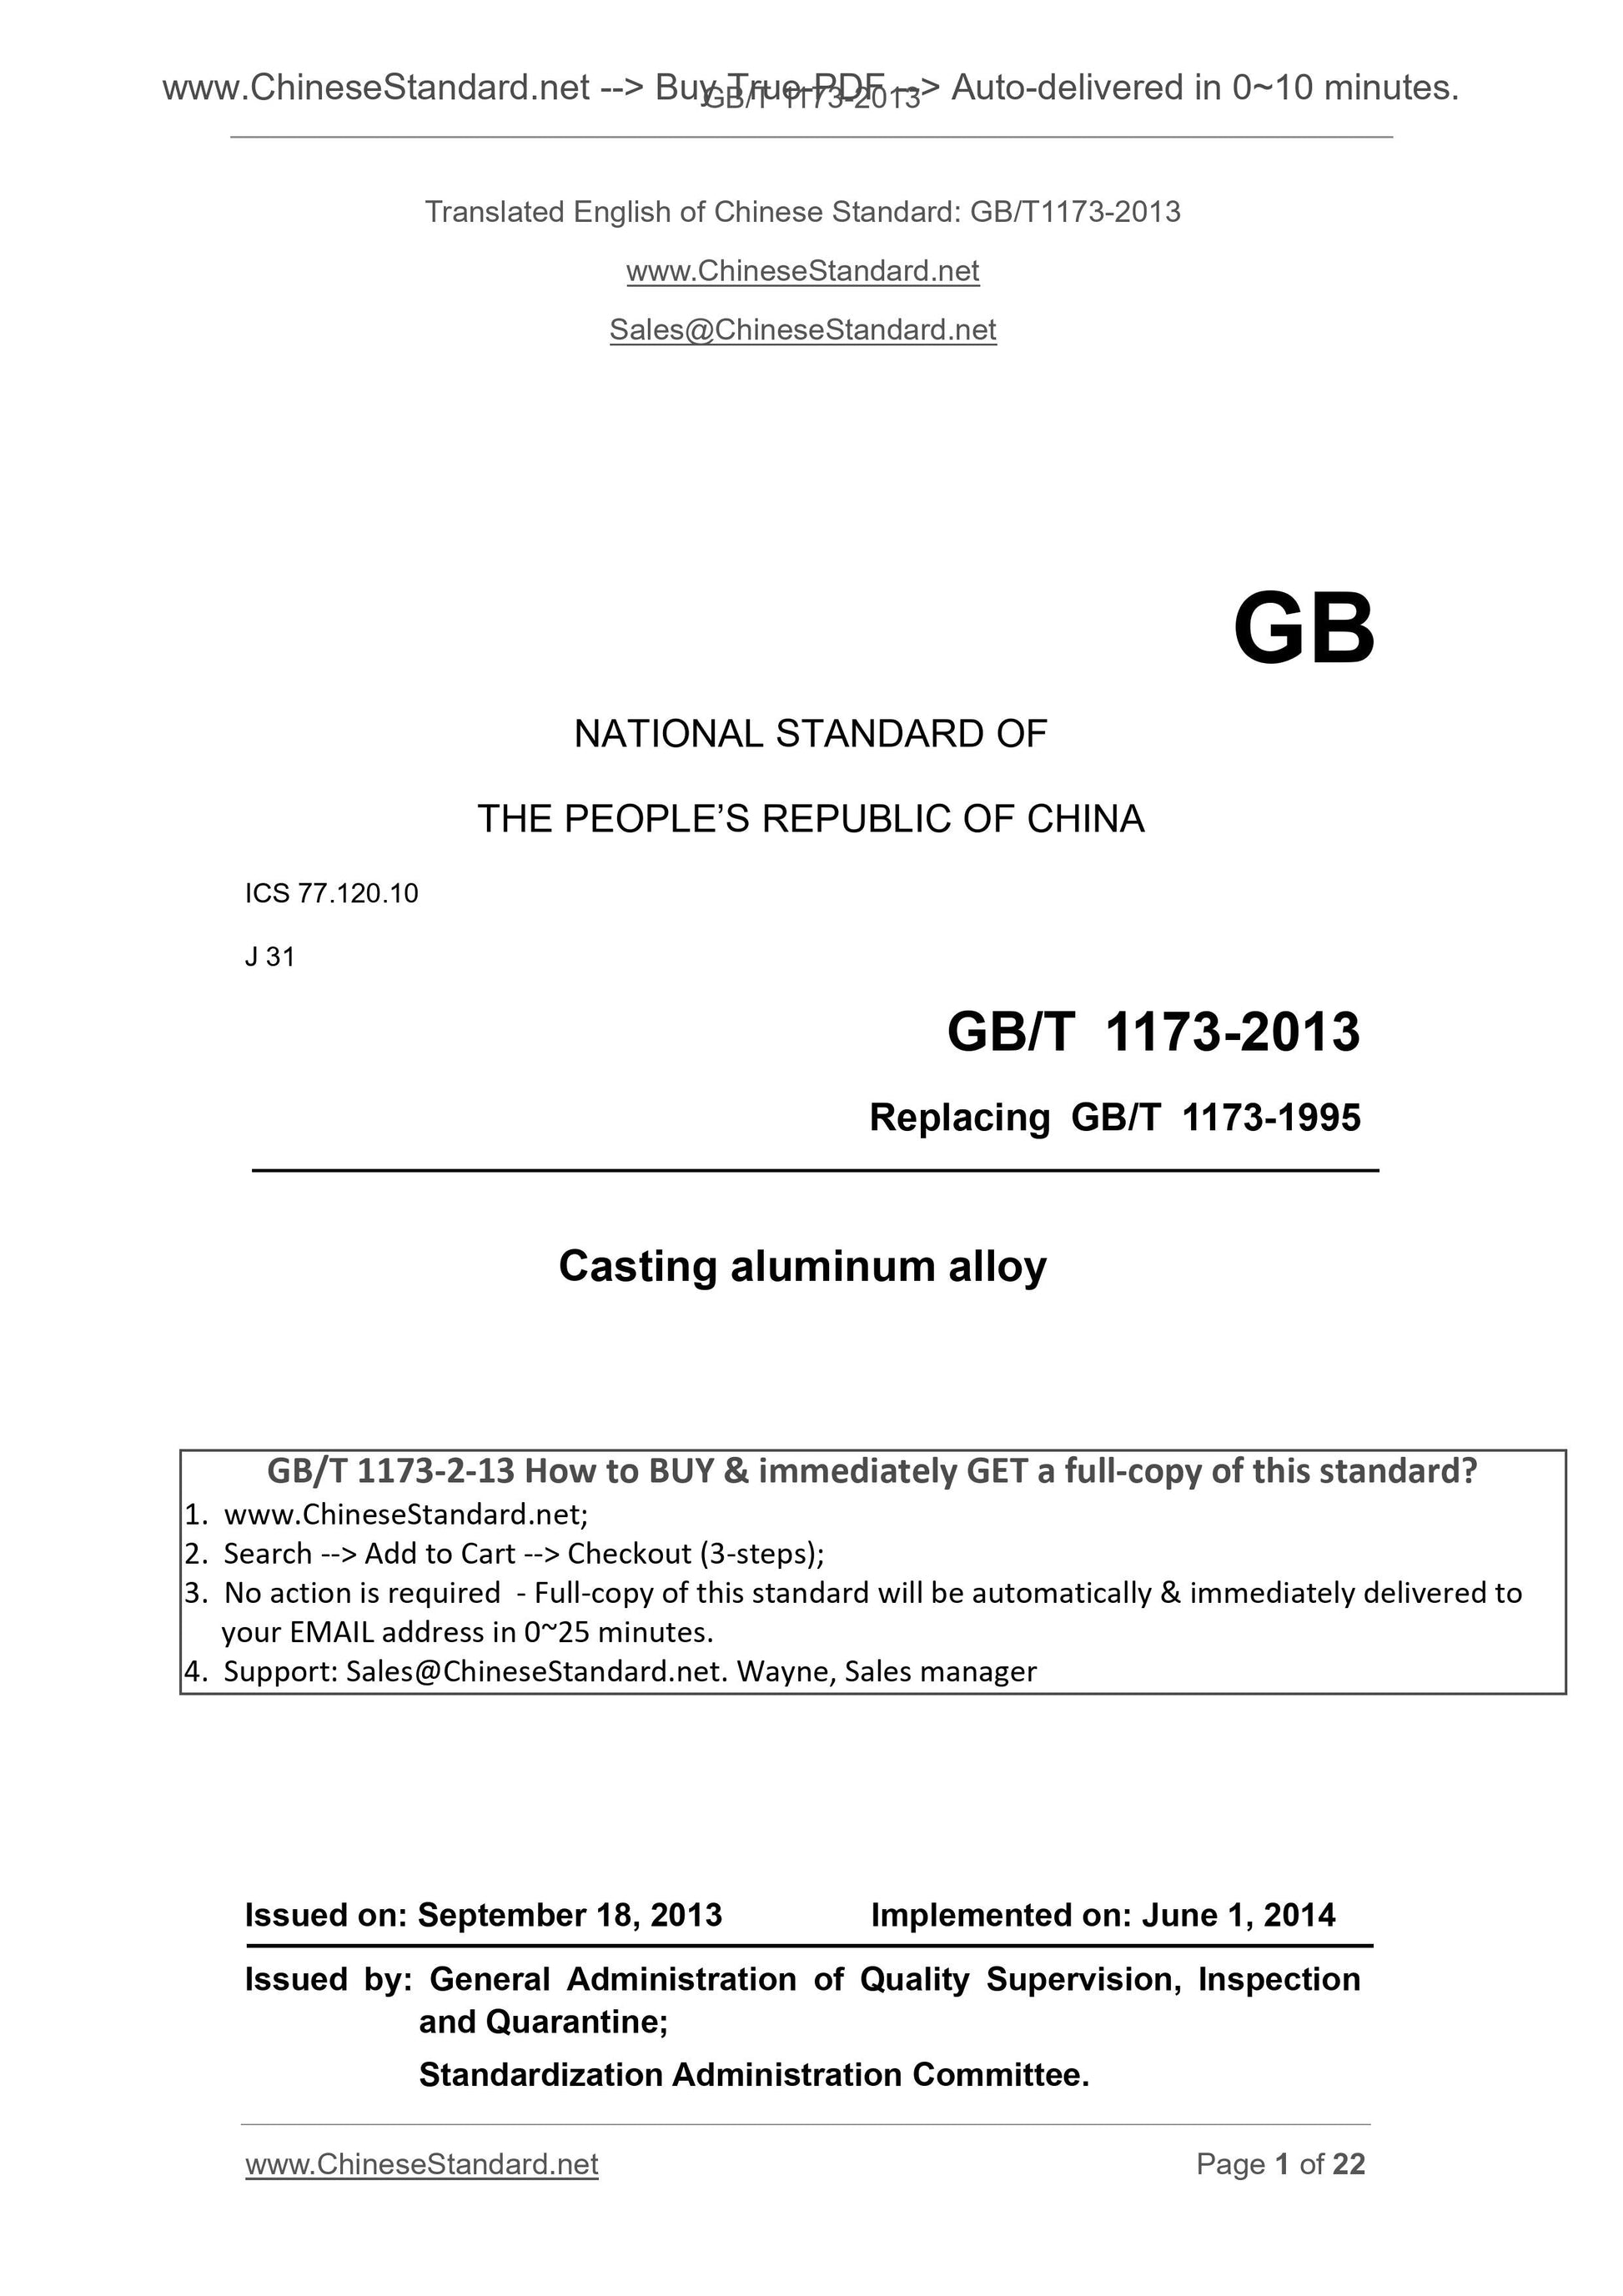 GB/T 1173-2013 Page 1